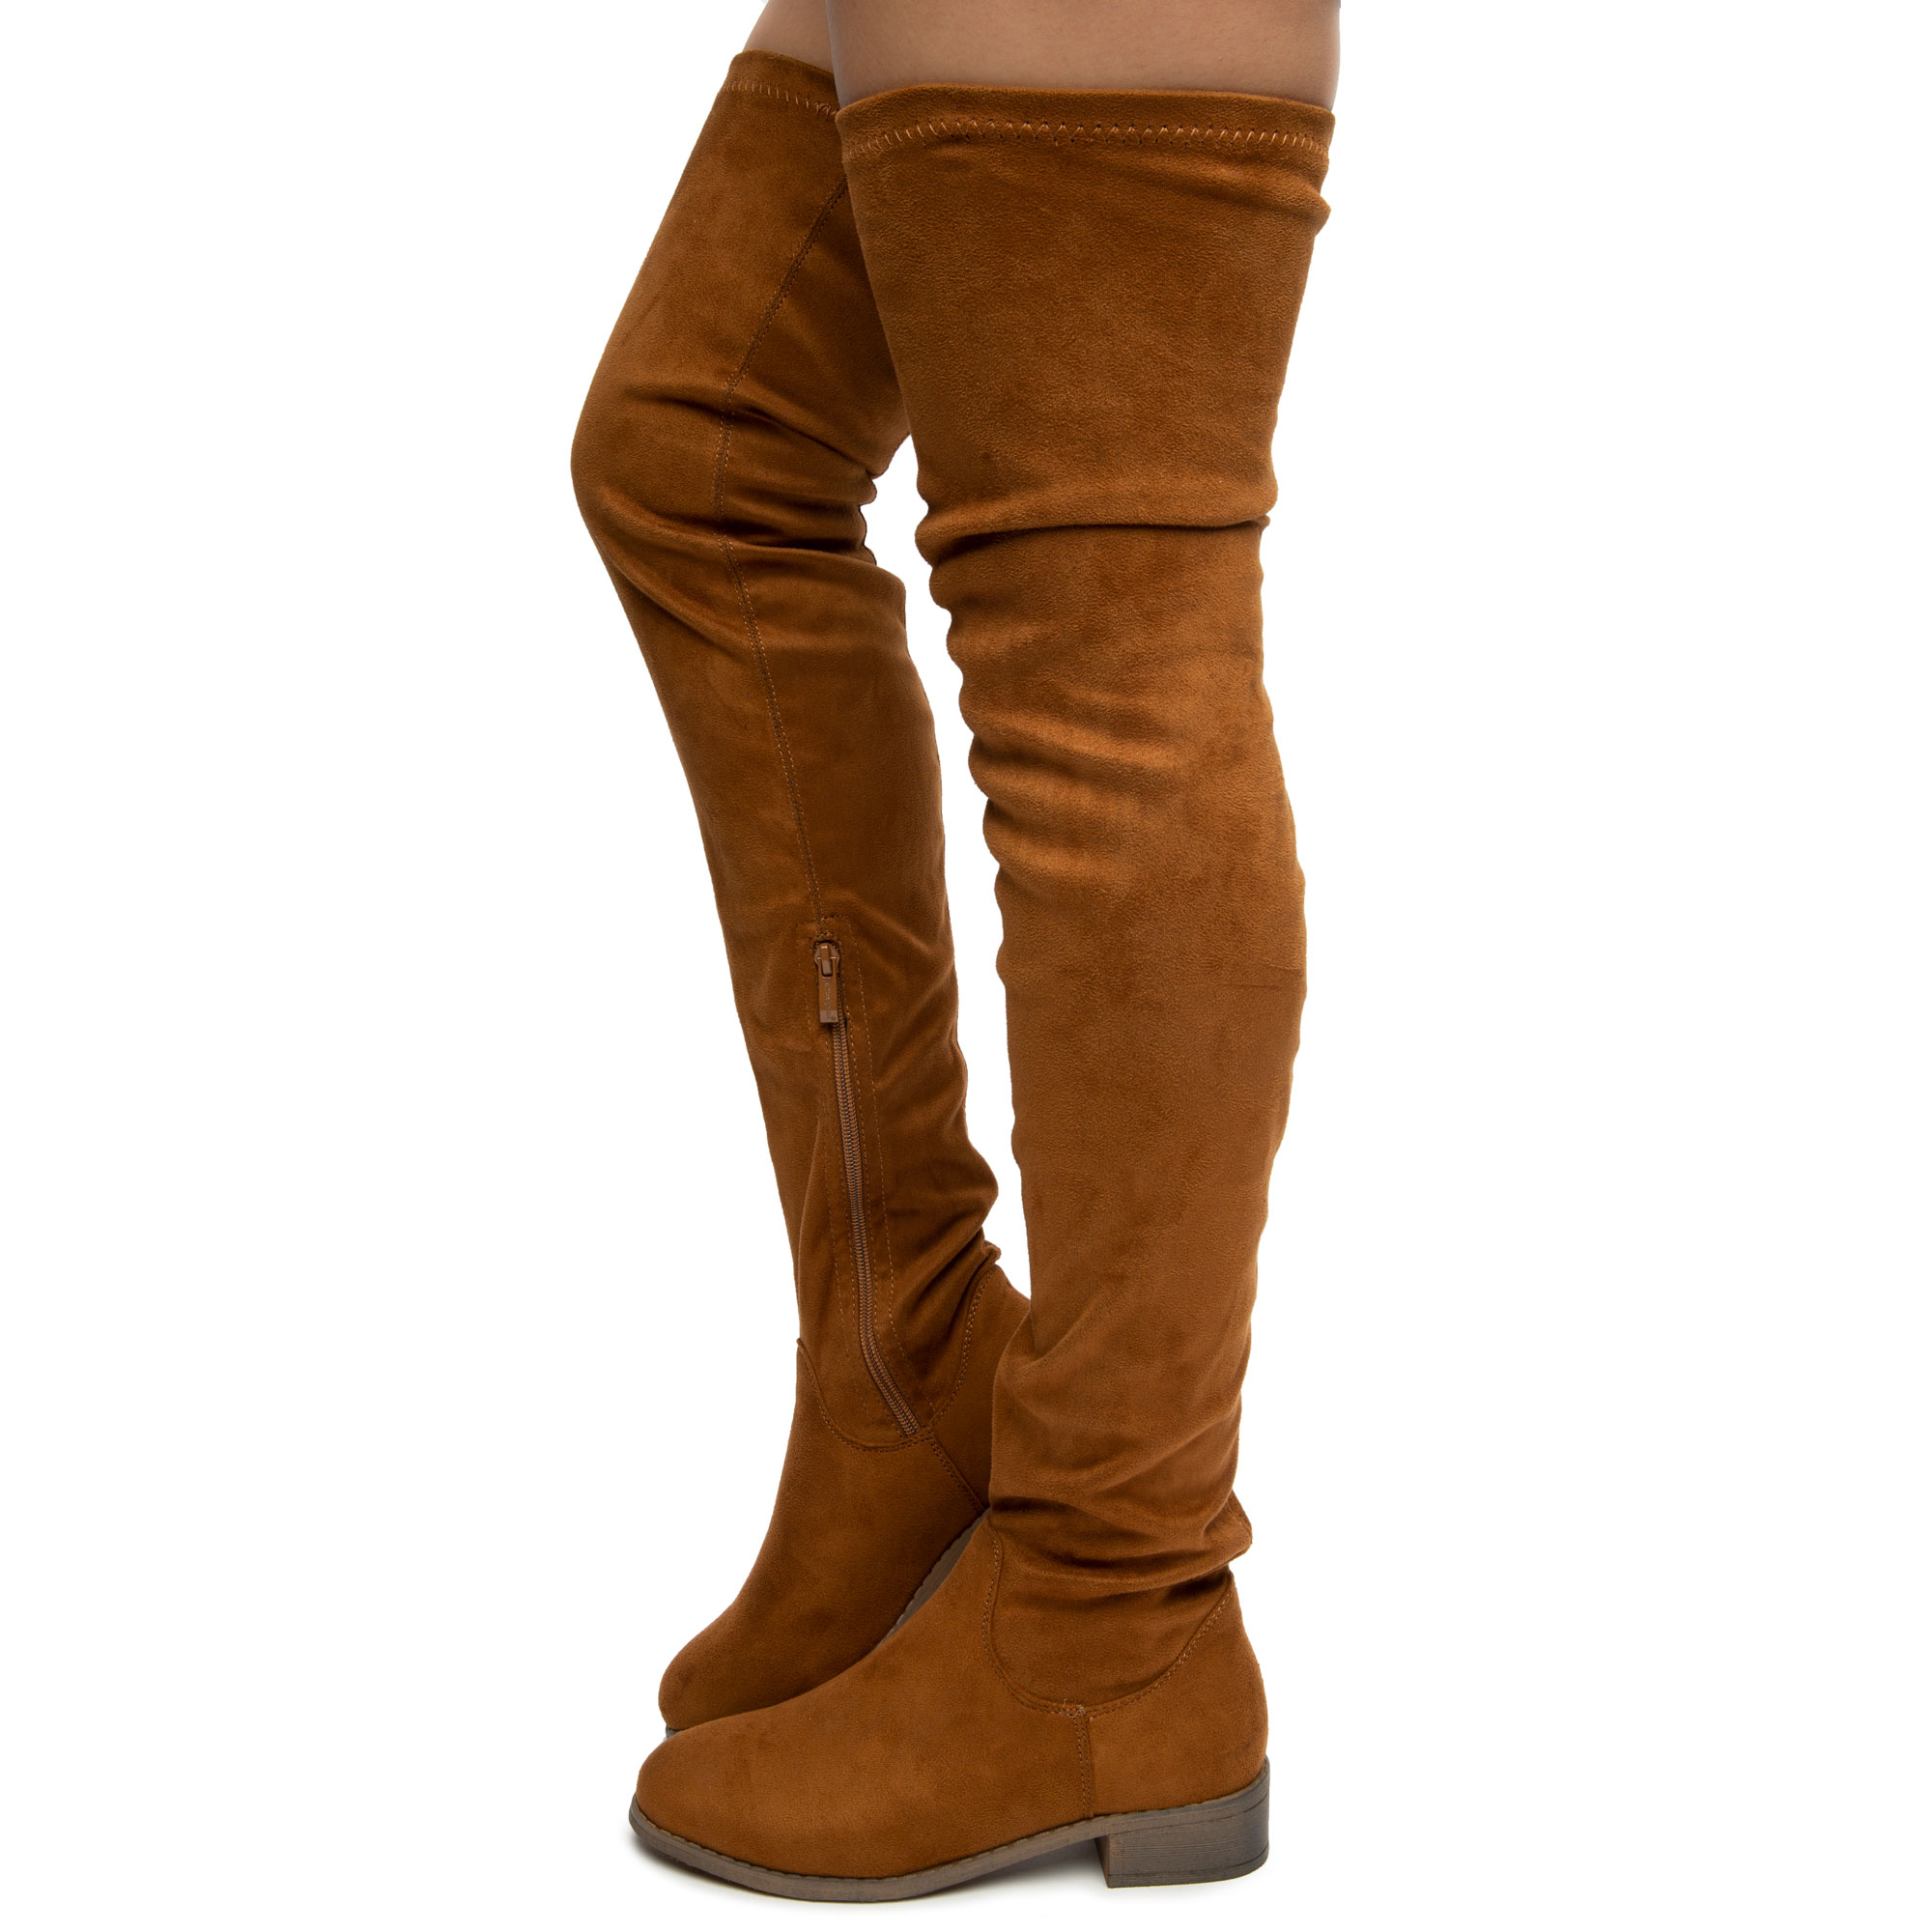 Strategia Leather Knee Boots in Tan Natural Womens Shoes Boots Over-the-knee boots 